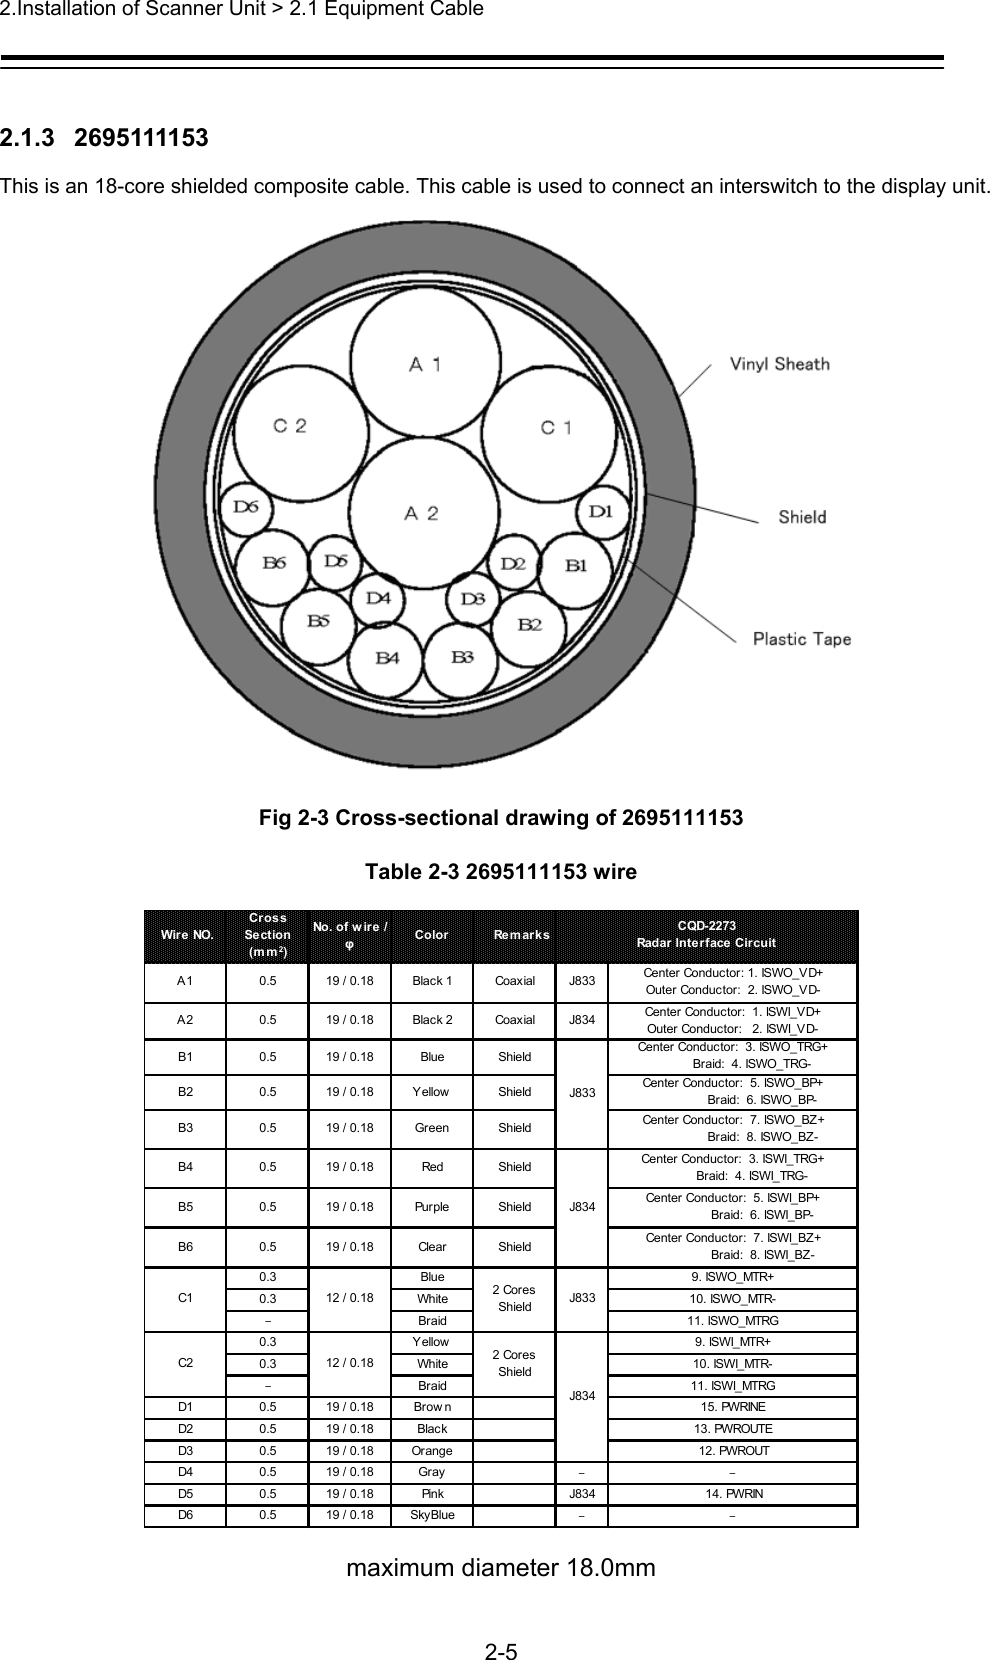 2.Installation of Scanner Unit &gt; 2.1 Equipment Cable   2-5  2.1.3   2695111153 This is an 18-core shielded composite cable. This cable is used to connect an interswitch to the display unit.    Fig 2-3 Cross-sectional drawing of 2695111153 Table 2-3 2695111153 wire  Wir e NO.CrossSection(mm 2)No. o f  w ir e  /φColor 　Re m ar k sA1 0.5 19 / 0.18 Black 1 Coaxial J833 Center Conductor: 1. ISWO_VD+Outer Conductor:  2. ISWO_VD-A2 0.5 19 / 0.18 Black 2 Coaxial J834 Center Conductor:  1. ISWI_VD+Outer Conductor:   2. ISWI_VD-B1 0.5 19 / 0.18 Blue Shield Center Conductor:  3. ISWO_TRG+           Braid:  4. ISWO_TRG-B2 0.5 19 / 0.18 Yellow Shield Center Conductor:  5. ISWO_BP+                 Braid:  6. ISWO_BP-B3 0.5 19 / 0.18 Green Shield Center Conductor:  7. ISWO_BZ+                 Braid:  8. ISWO_BZ-B4 0.5 19 / 0.18 Red Shield Center Conductor:  3. ISWI_TRG+           Braid:  4. ISWI_TRG-B5 0.5 19 / 0.18 Purple Shield Center Conductor:  5. ISWI_BP+                 Braid:  6. ISWI_BP-B6 0.5 19 / 0.18 Clear Shield Center Conductor:  7. ISWI_BZ+                 Braid:  8. ISWI_BZ-0.3 Blue 9. ISWO_MTR+0.3 White 10. ISWO_MTR--Braid 11. ISWO_MTRG0.3 Yellow 9. ISWI_MTR+0.3 White 10. ISWI_MTR--Braid 11. ISWI_MTRGD1 0.5 19 / 0.18 Brow n 15. PWRINED2 0.5 19 / 0.18 Black 13. PWROUTED3 0.5 19 / 0.18 Orange 12. PWROUTD4 0.5 19 / 0.18 Gray --D5 0.5 19 / 0.18 Pink J834 14. PWRIND6 0.5 19 / 0.18 SkyBlue --CQD-2273Radar Interface CircuitC1C212 / 0.1812 / 0.18J833J8342 CoresShield2 CoresShieldJ833J834 maximum diameter 18.0mm 